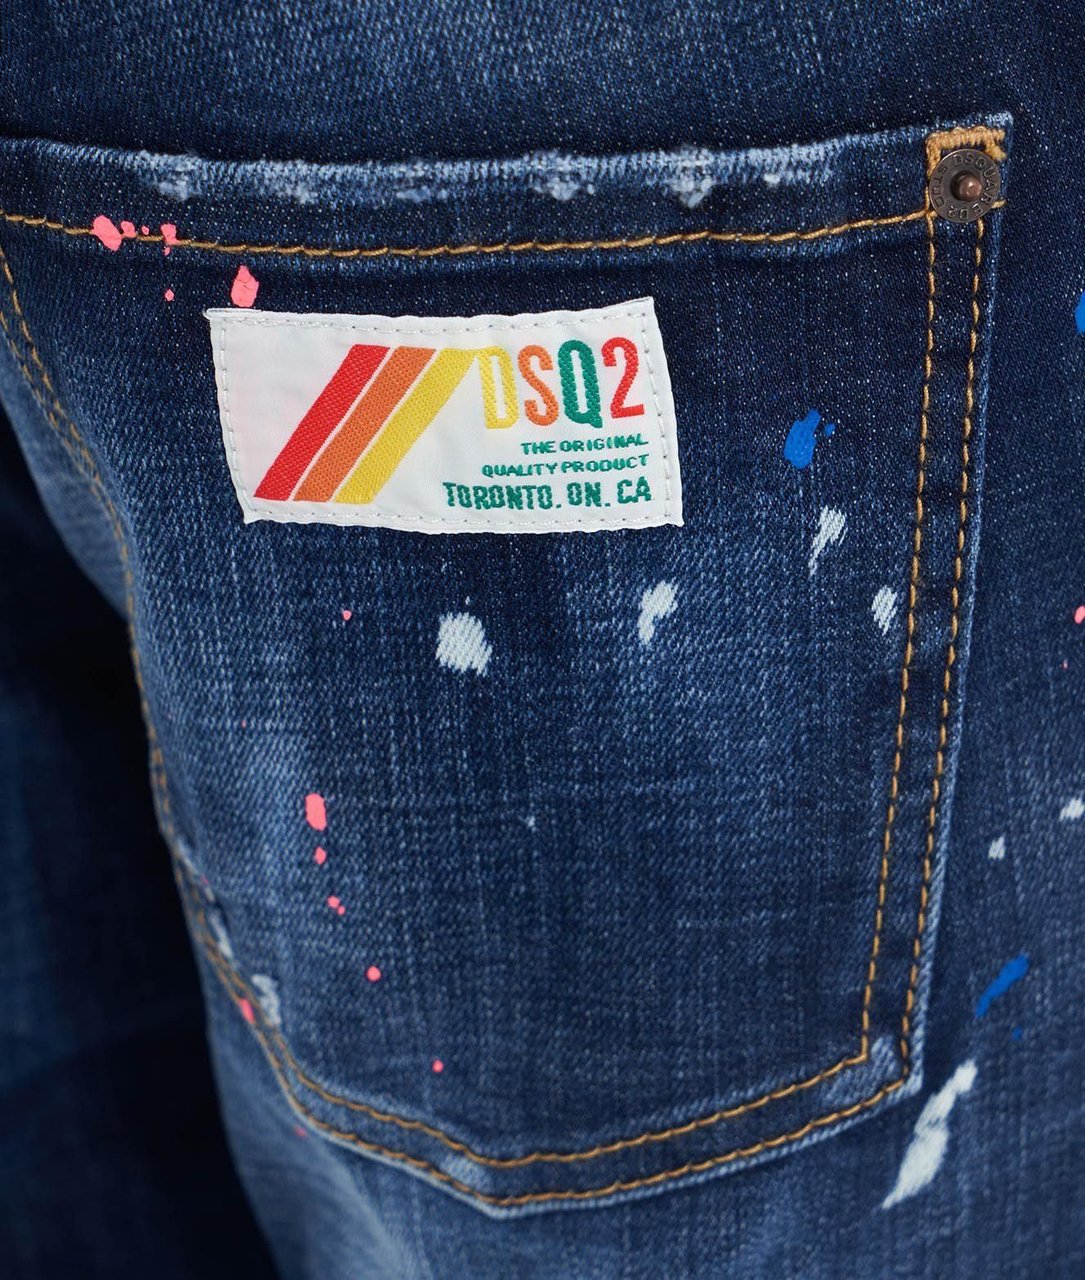 Dsquared2 Jeans "Cool Girl Jean" Blauw